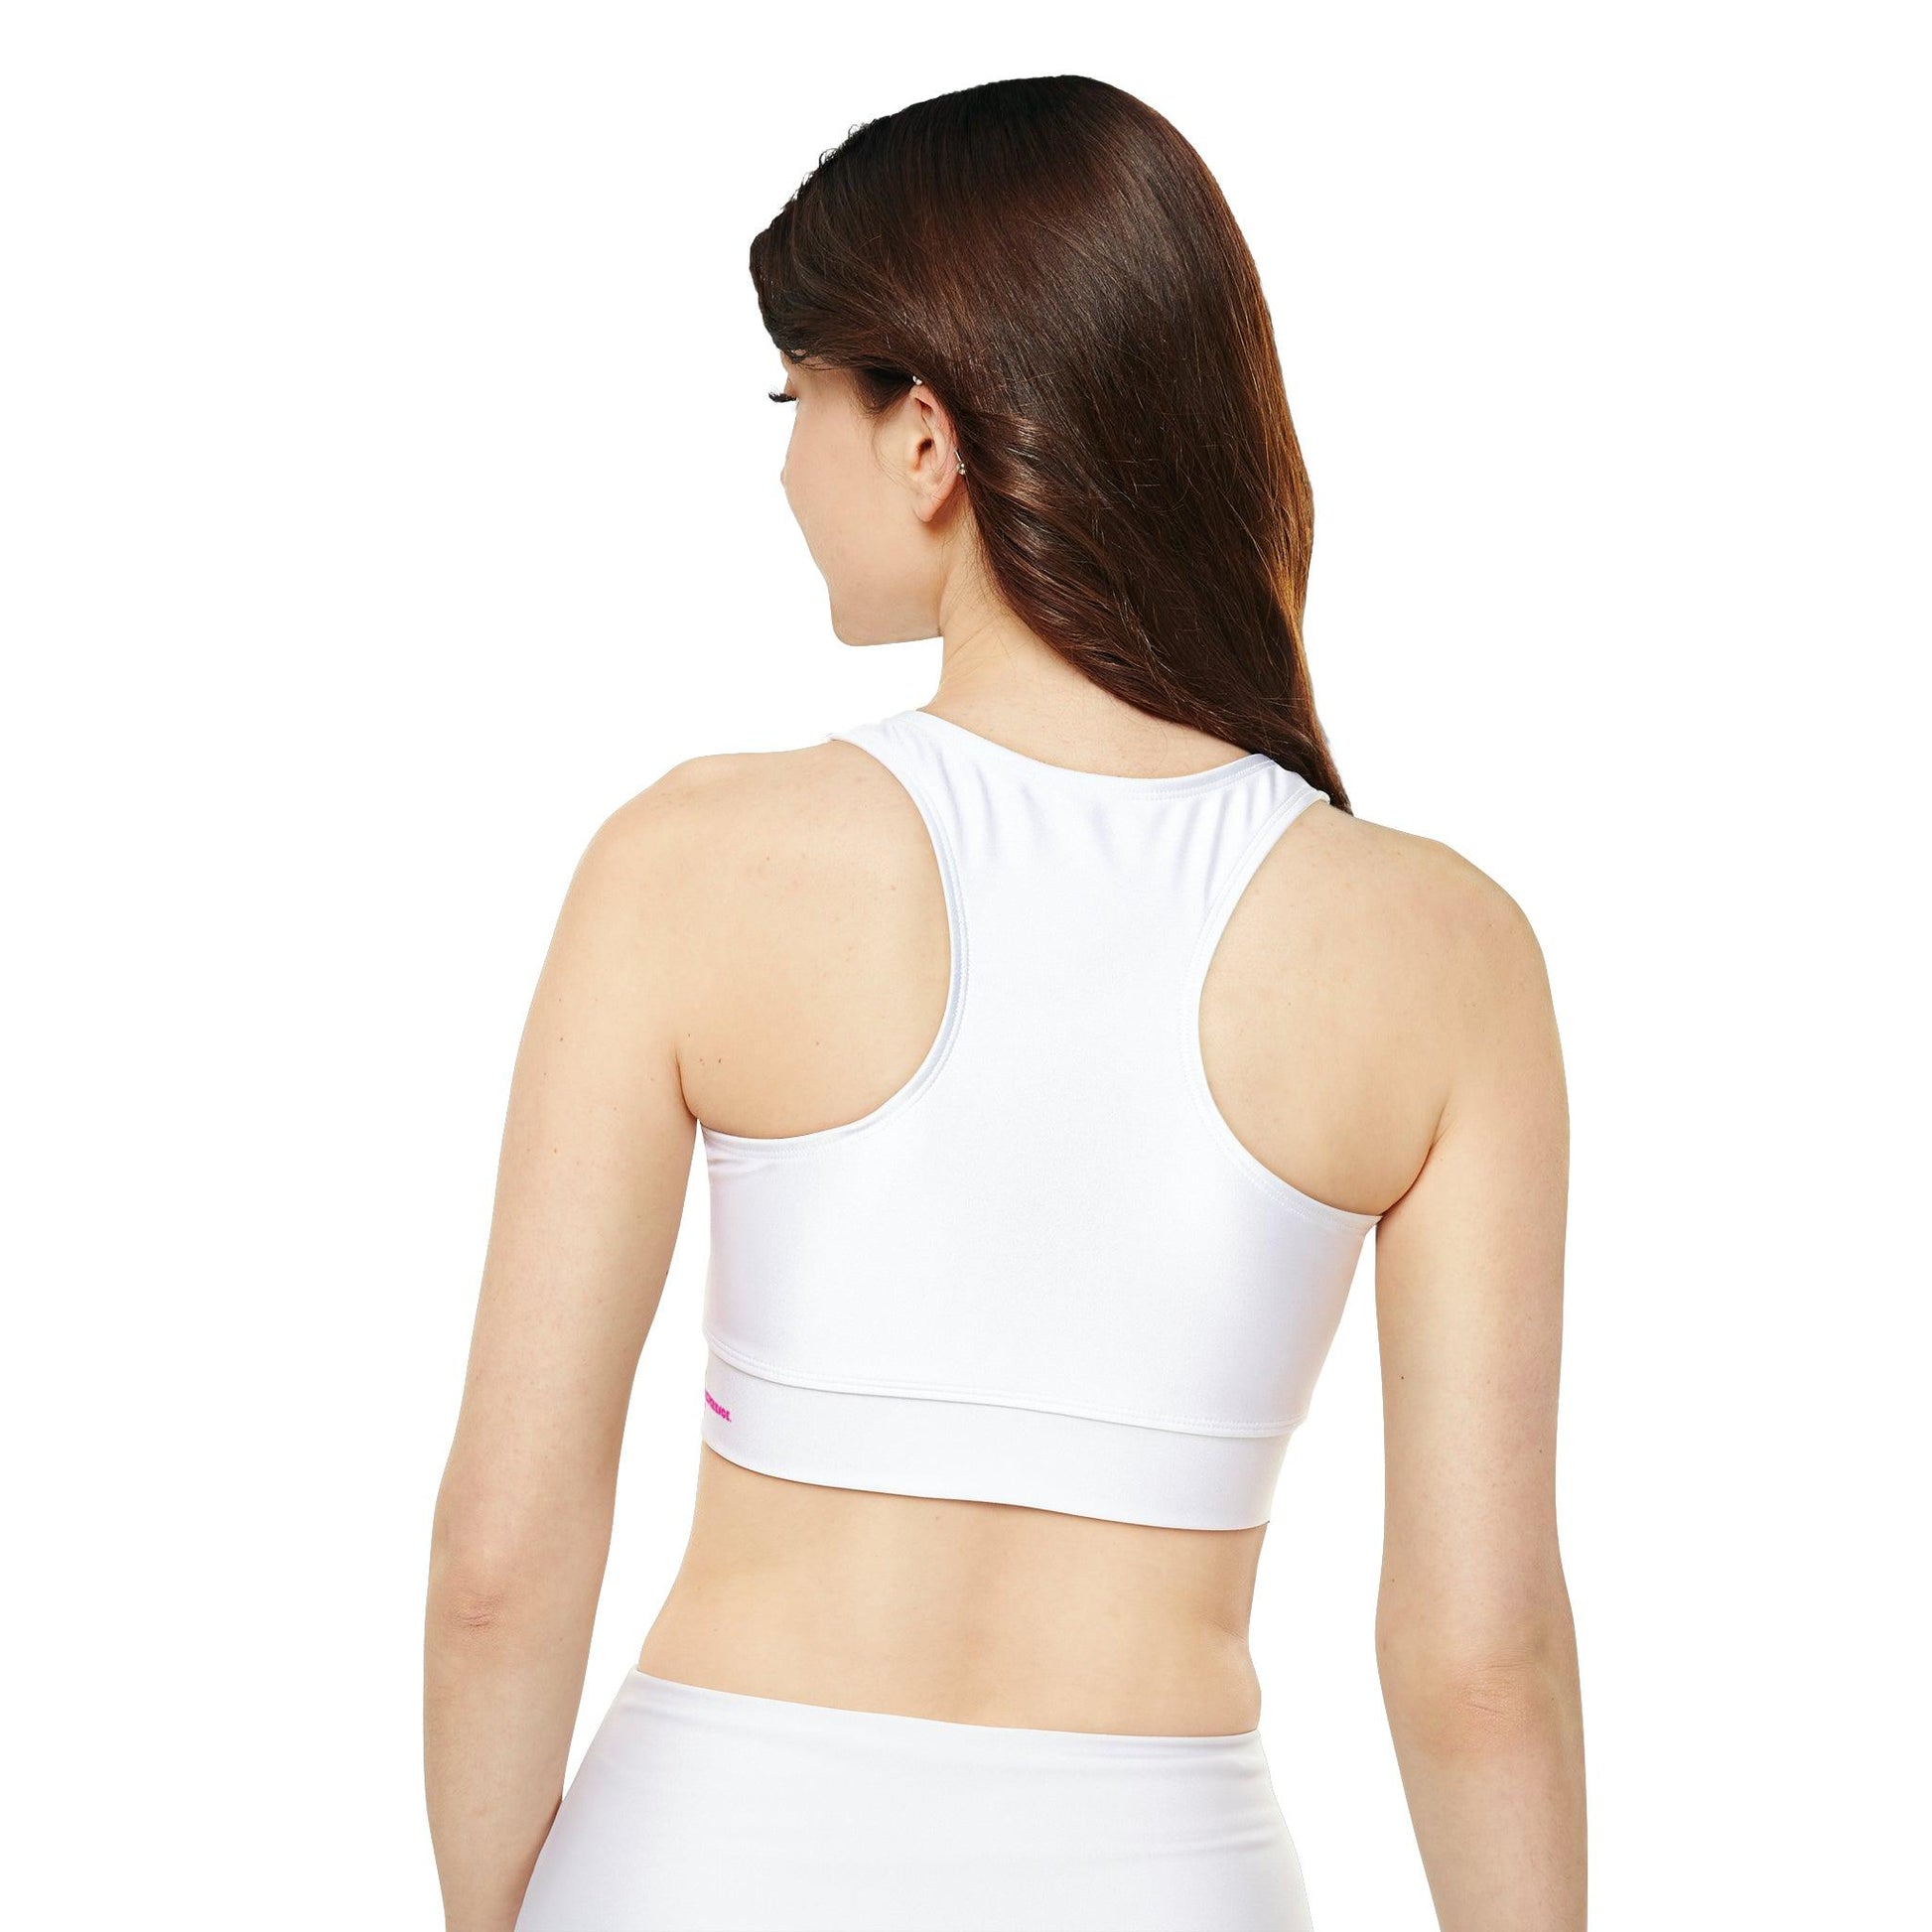 Fully Lined, White Padded Sports Bra - COFFEEBRE